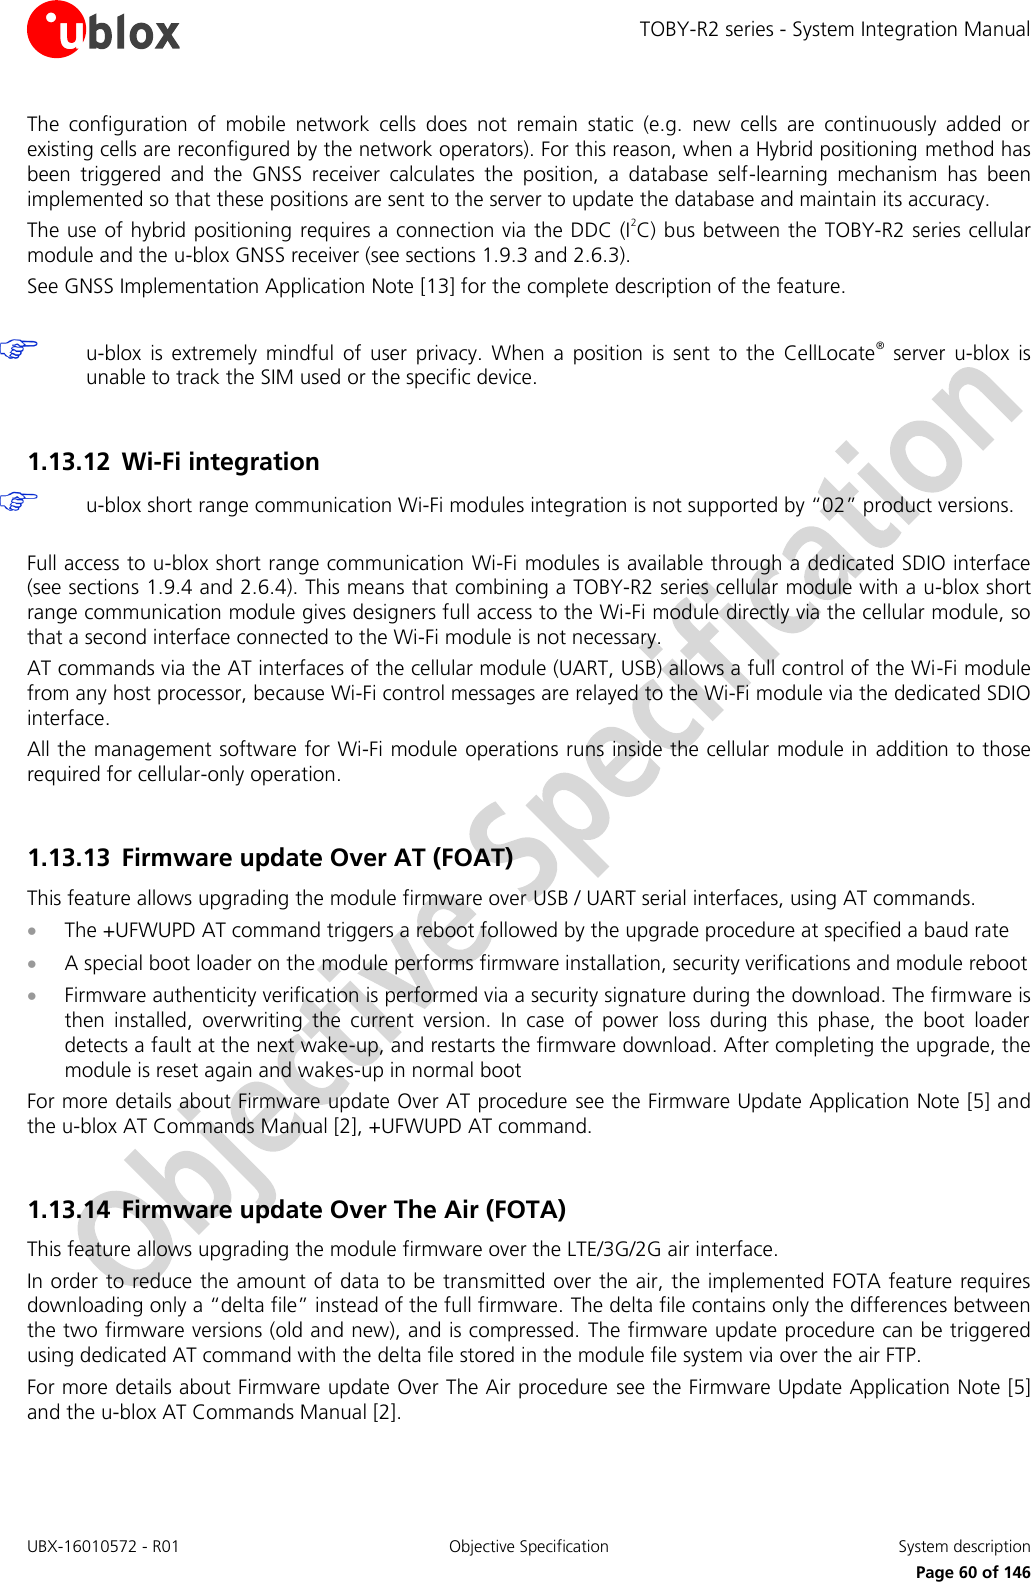 TOBY-R2 series - System Integration Manual UBX-16010572 - R01  Objective Specification  System description     Page 60 of 146 The  configuration  of  mobile  network  cells  does  not  remain  static  (e.g.  new  cells  are  continuously  added  or existing cells are reconfigured by the network operators). For this reason, when a Hybrid positioning method has been  triggered  and  the  GNSS  receiver  calculates  the  position,  a  database  self-learning  mechanism  has  been implemented so that these positions are sent to the server to update the database and maintain its accuracy. The use of hybrid positioning requires a connection via the DDC (I2C) bus between the TOBY-R2 series cellular module and the u-blox GNSS receiver (see sections 1.9.3 and 2.6.3). See GNSS Implementation Application Note [13] for the complete description of the feature.   u-blox  is  extremely  mindful  of  user  privacy.  When  a  position  is  sent  to  the  CellLocate®  server  u-blox  is unable to track the SIM used or the specific device.  1.13.12 Wi-Fi integration  u-blox short range communication Wi-Fi modules integration is not supported by “02” product versions.  Full access to u-blox short range communication Wi-Fi modules is available through a dedicated SDIO interface (see sections 1.9.4 and 2.6.4). This means that combining a TOBY-R2 series cellular module with a u-blox short range communication module gives designers full access to the Wi-Fi module directly via the cellular module, so that a second interface connected to the Wi-Fi module is not necessary.  AT commands via the AT interfaces of the cellular module (UART, USB) allows a full control of the Wi-Fi module from any host processor, because Wi-Fi control messages are relayed to the Wi-Fi module via the dedicated SDIO interface. All the management software for Wi-Fi module operations runs inside the cellular module in  addition to those required for cellular-only operation.  1.13.13 Firmware update Over AT (FOAT) This feature allows upgrading the module firmware over USB / UART serial interfaces, using AT commands.  The +UFWUPD AT command triggers a reboot followed by the upgrade procedure at specified a baud rate  A special boot loader on the module performs firmware installation, security verifications and module reboot  Firmware authenticity verification is performed via a security signature during the download. The firmware is then  installed,  overwriting  the  current  version.  In  case  of  power  loss  during  this  phase,  the  boot  loader detects a fault at the next wake-up, and restarts the firmware download. After completing the upgrade, the module is reset again and wakes-up in normal boot For more details about Firmware update Over AT procedure see the Firmware Update Application Note [5] and the u-blox AT Commands Manual [2], +UFWUPD AT command.  1.13.14 Firmware update Over The Air (FOTA) This feature allows upgrading the module firmware over the LTE/3G/2G air interface.  In order to reduce the amount of data to be transmitted over the air, the implemented FOTA feature requires downloading only a “delta file” instead of the full firmware. The delta file contains only the differences between the two firmware versions (old and new), and is compressed. The firmware update procedure can be triggered using dedicated AT command with the delta file stored in the module file system via over the air FTP. For more details about Firmware update Over The Air procedure see the Firmware Update Application Note [5] and the u-blox AT Commands Manual [2].  